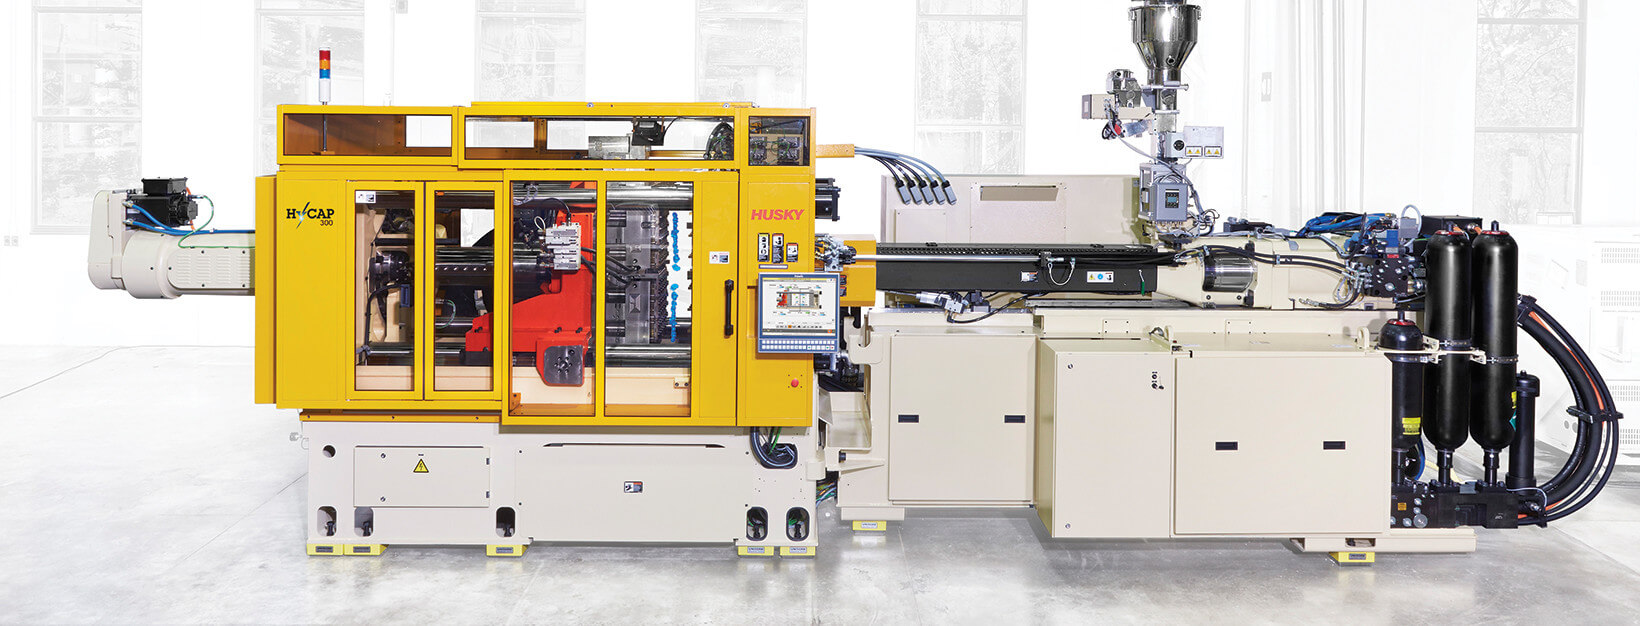 Husky Injection Molding Systems: Refining proven HPP ...